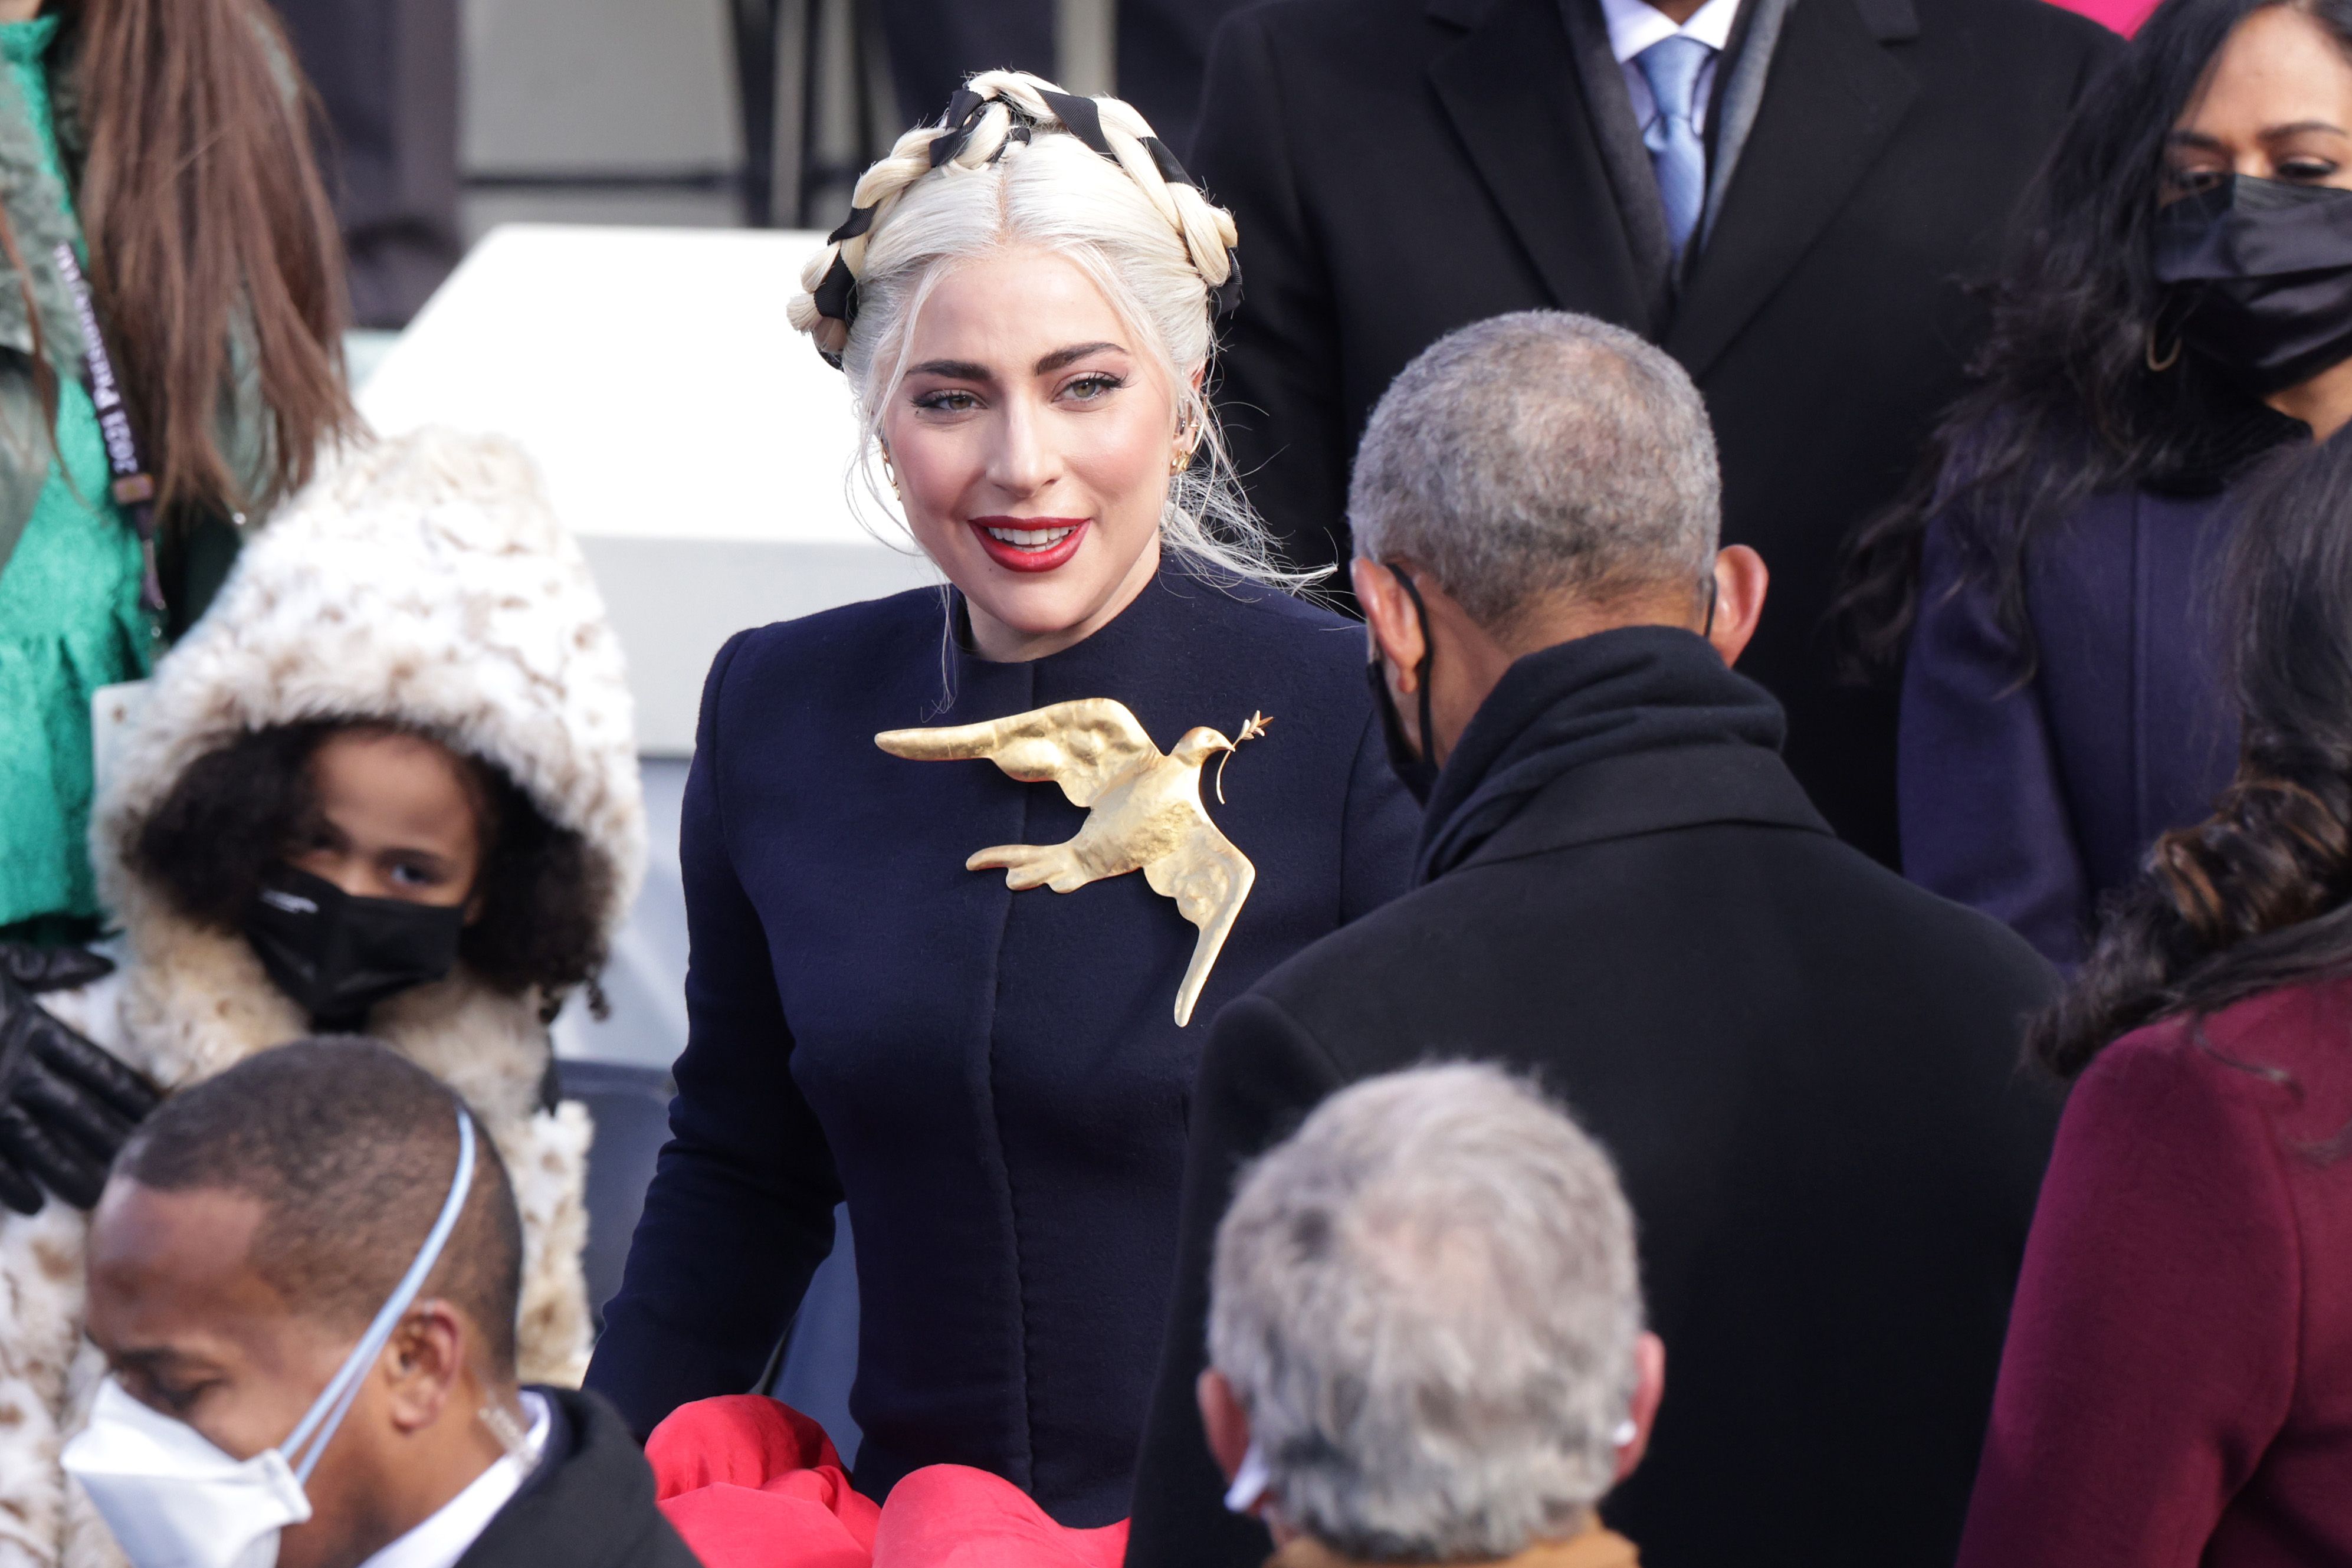 Lady Gaga On What Her Inauguration Dove Pin Means Schiaparelli Dress Symbolism